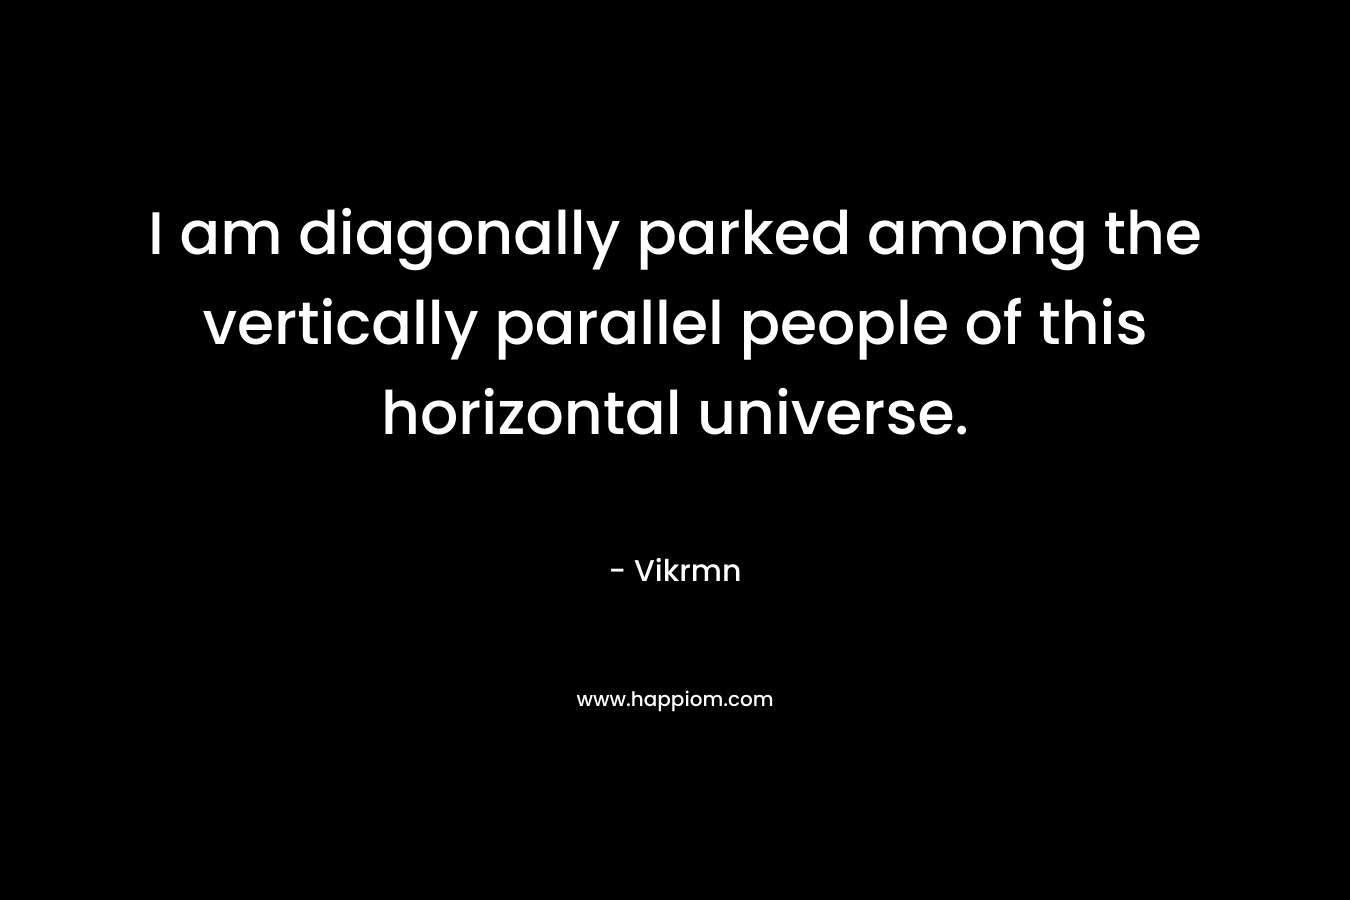 I am diagonally parked among the vertically parallel people of this horizontal universe.